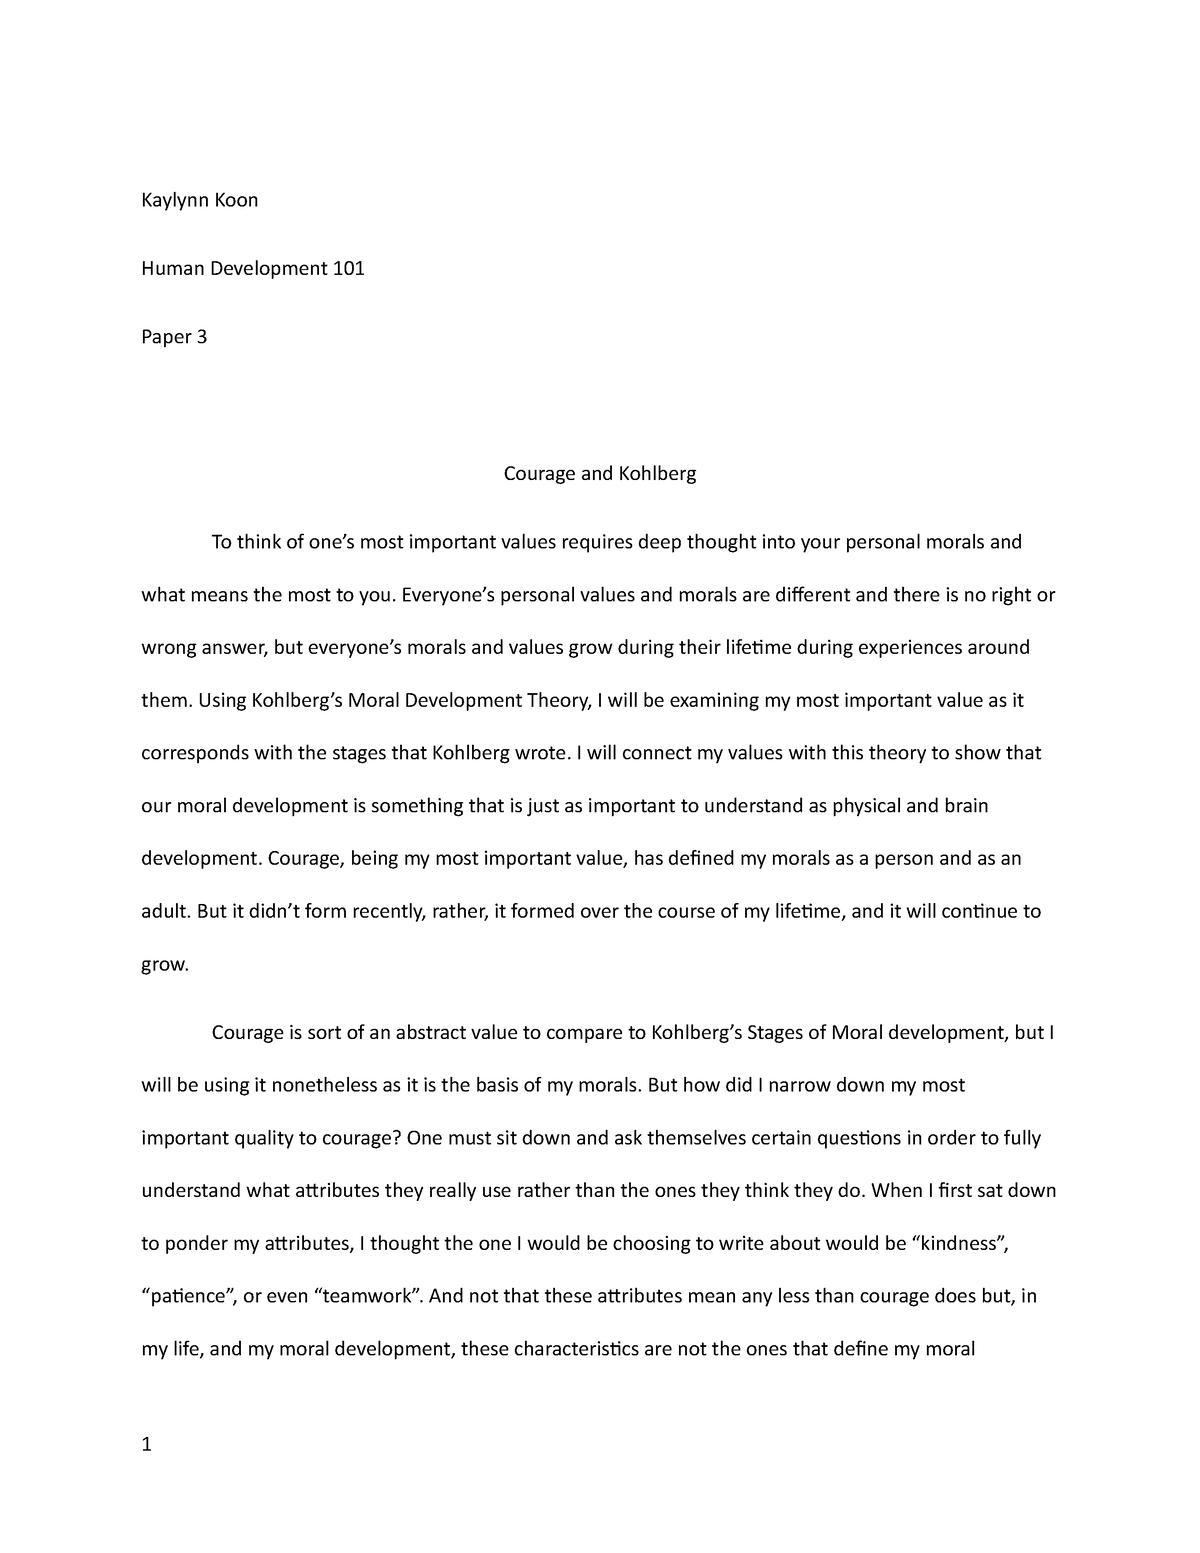 paper-3-example-essay-for-this-course-h-d-101-wsu-studocu